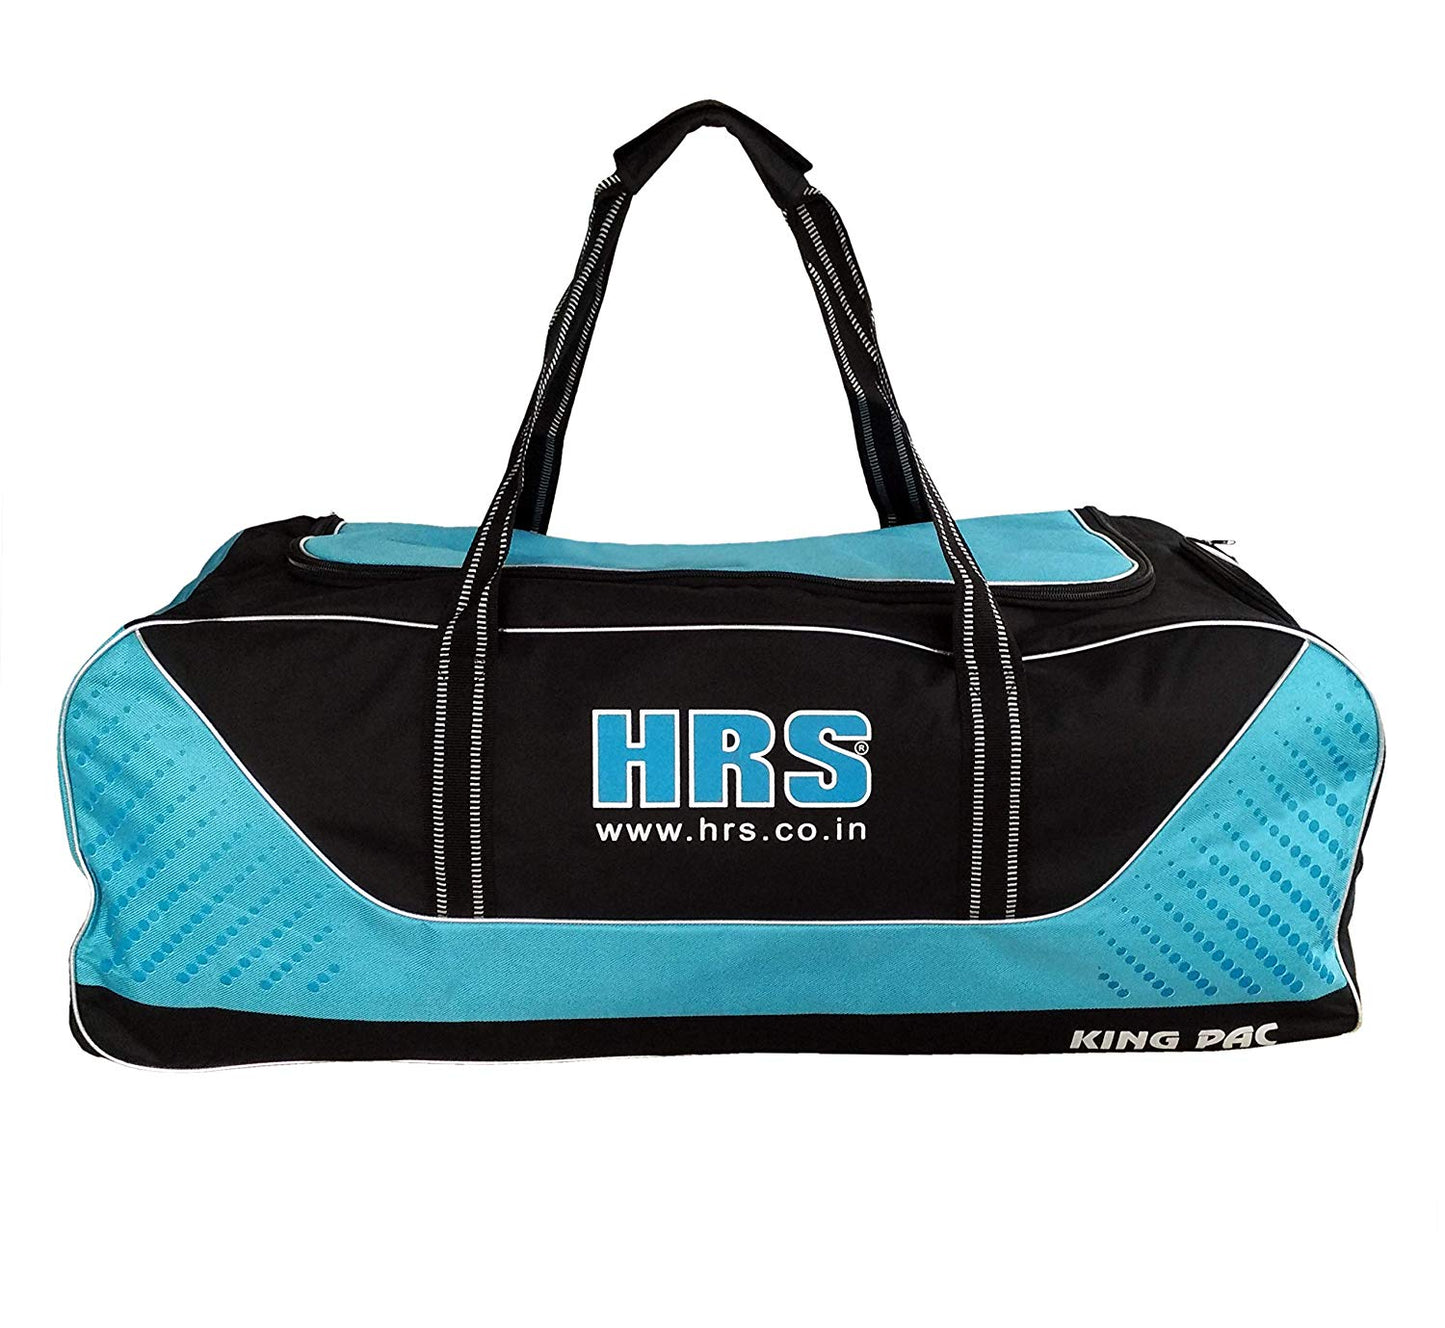 HRS Trolly Style Cricket Team Kitbag King Pac with Wheels, Blue/Black - Best Price online Prokicksports.com